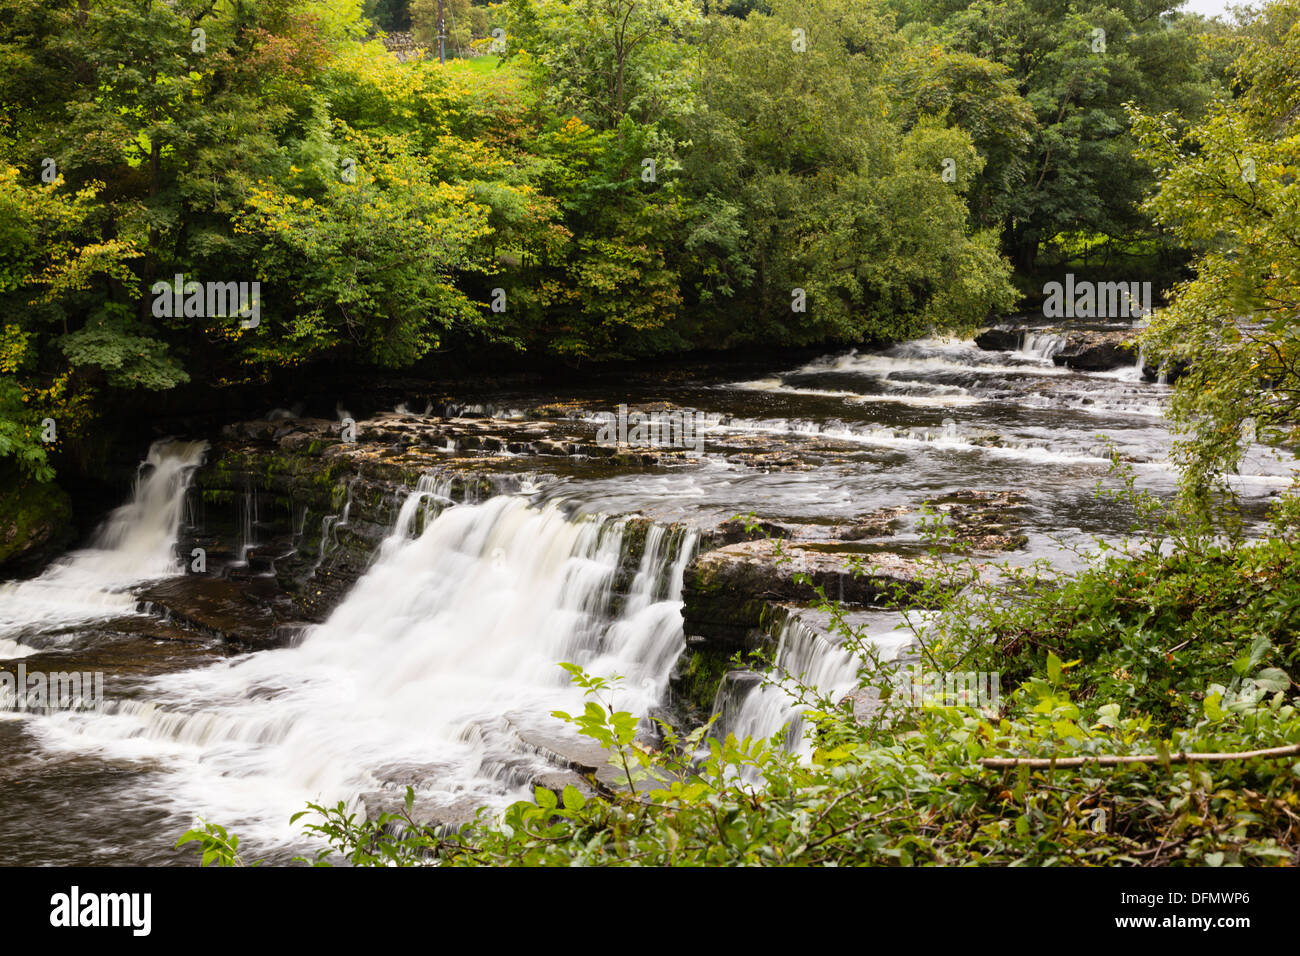 Aysgarth middle falls on the River Ure, North Yorkshire Dales. Stock Photo